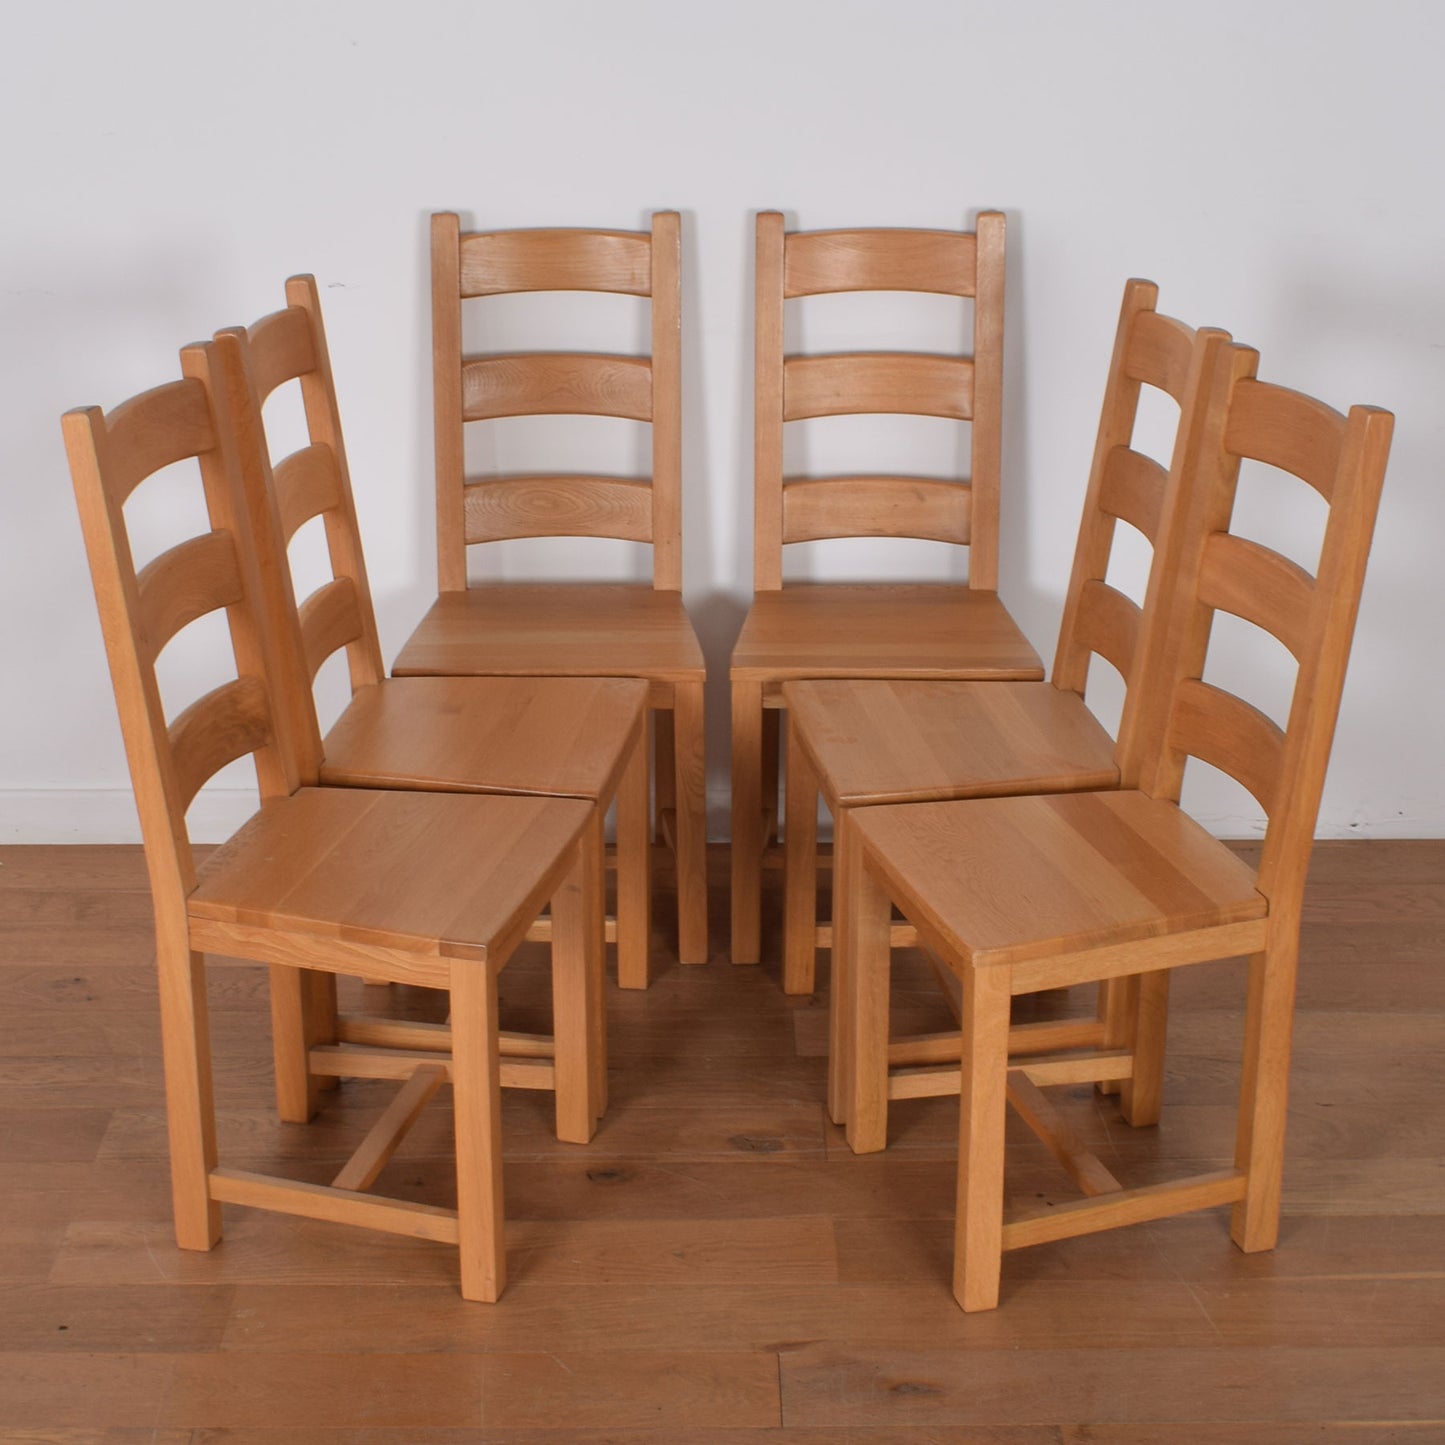 Light Oak Table with Six Chairs